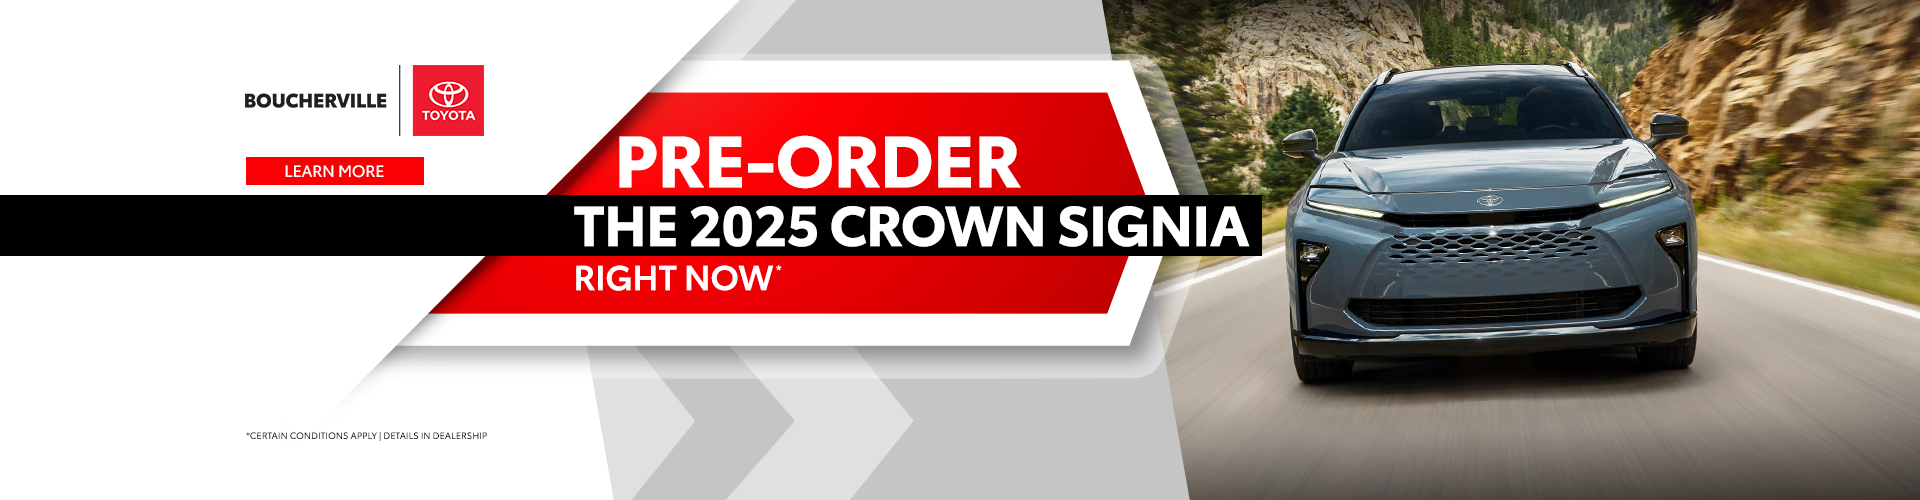 PRE-ORDER THE 2025 CROWN SIGNIA